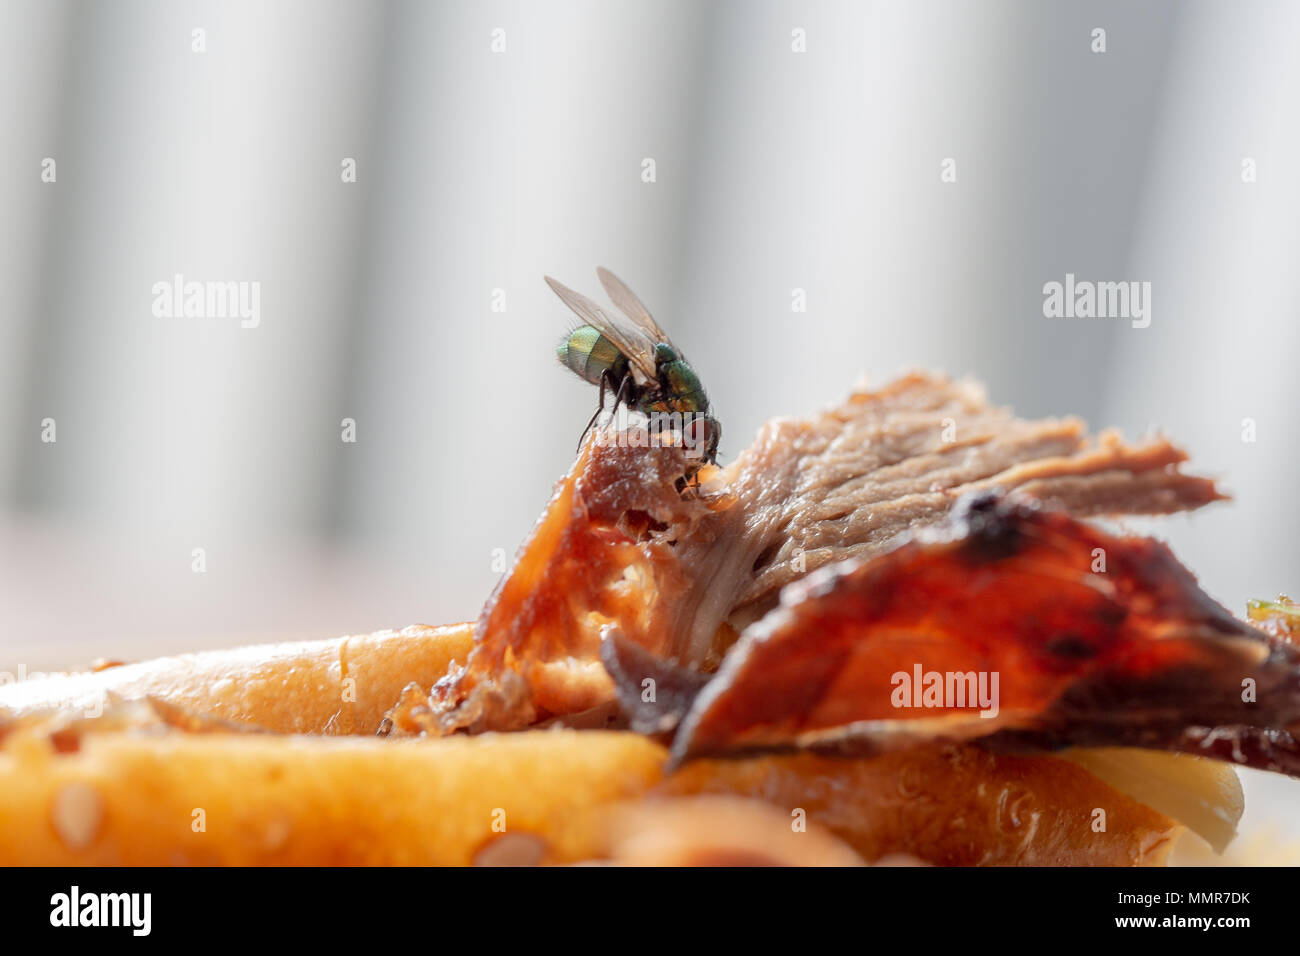 Close up on a house fly eating leftover meat Stock Photo